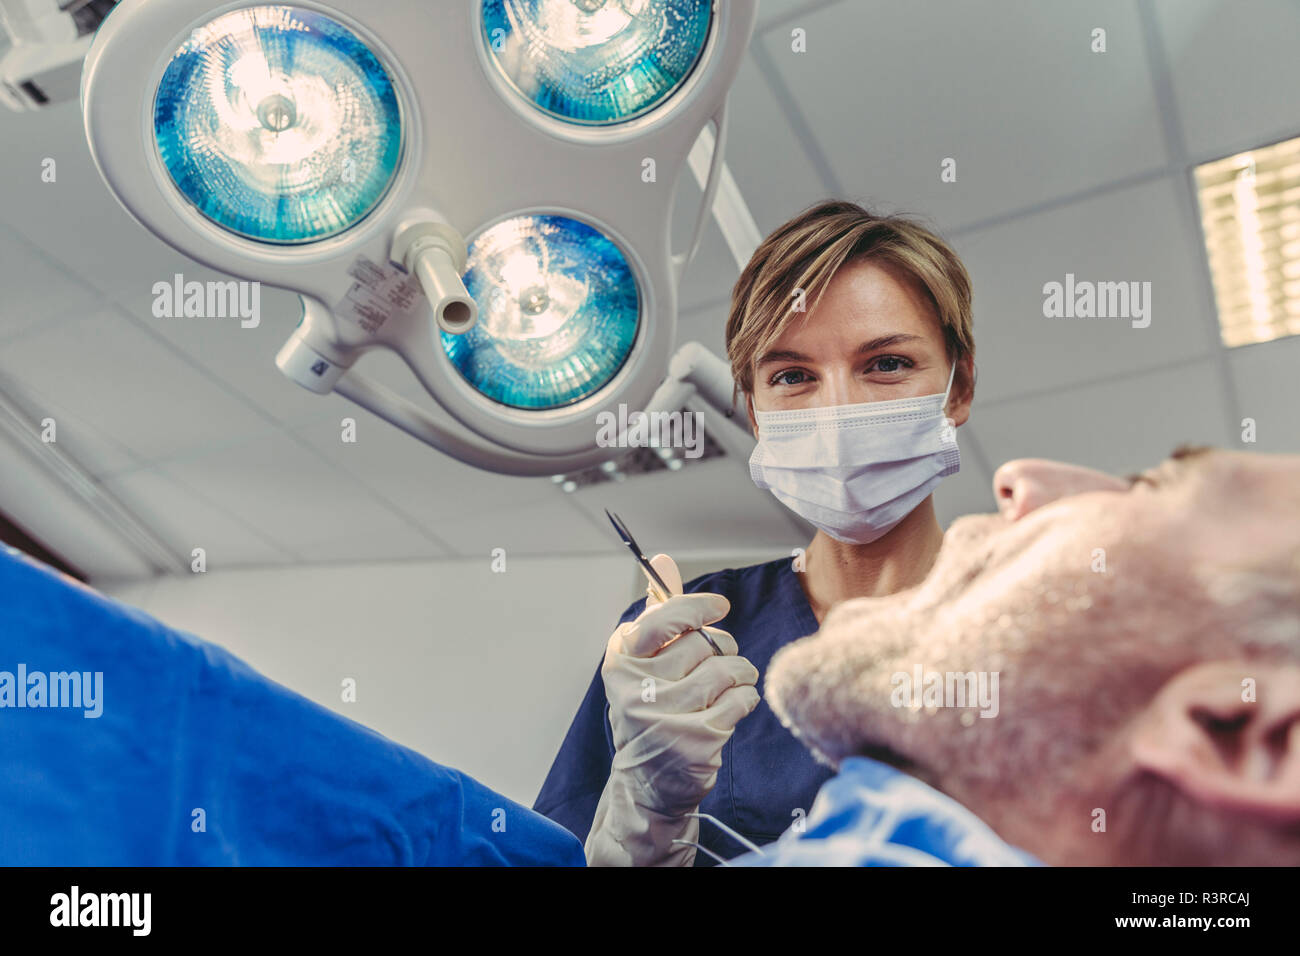 Dental surgeon during surgical procedure on a patient Stock Photo